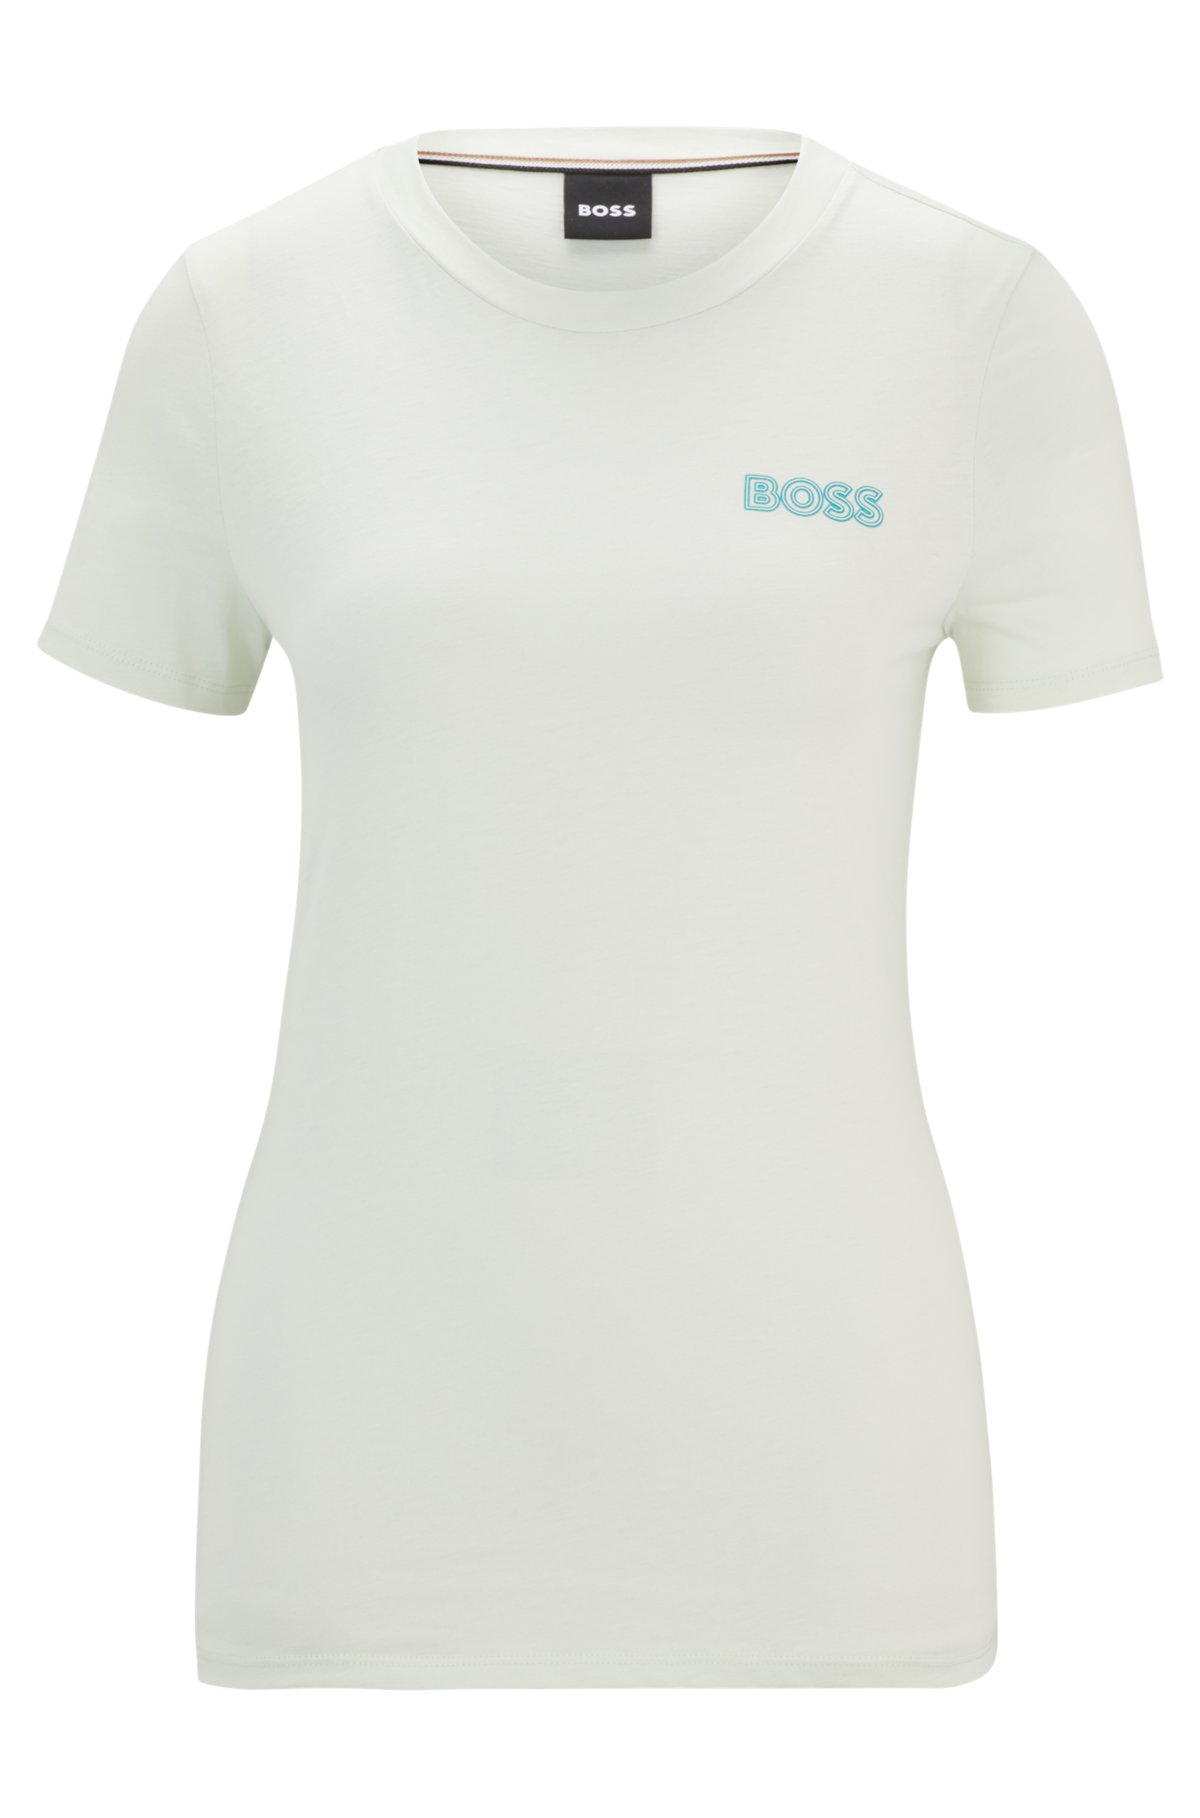 Slim-fit T-shirt in pure cotton with logo detail, Natural